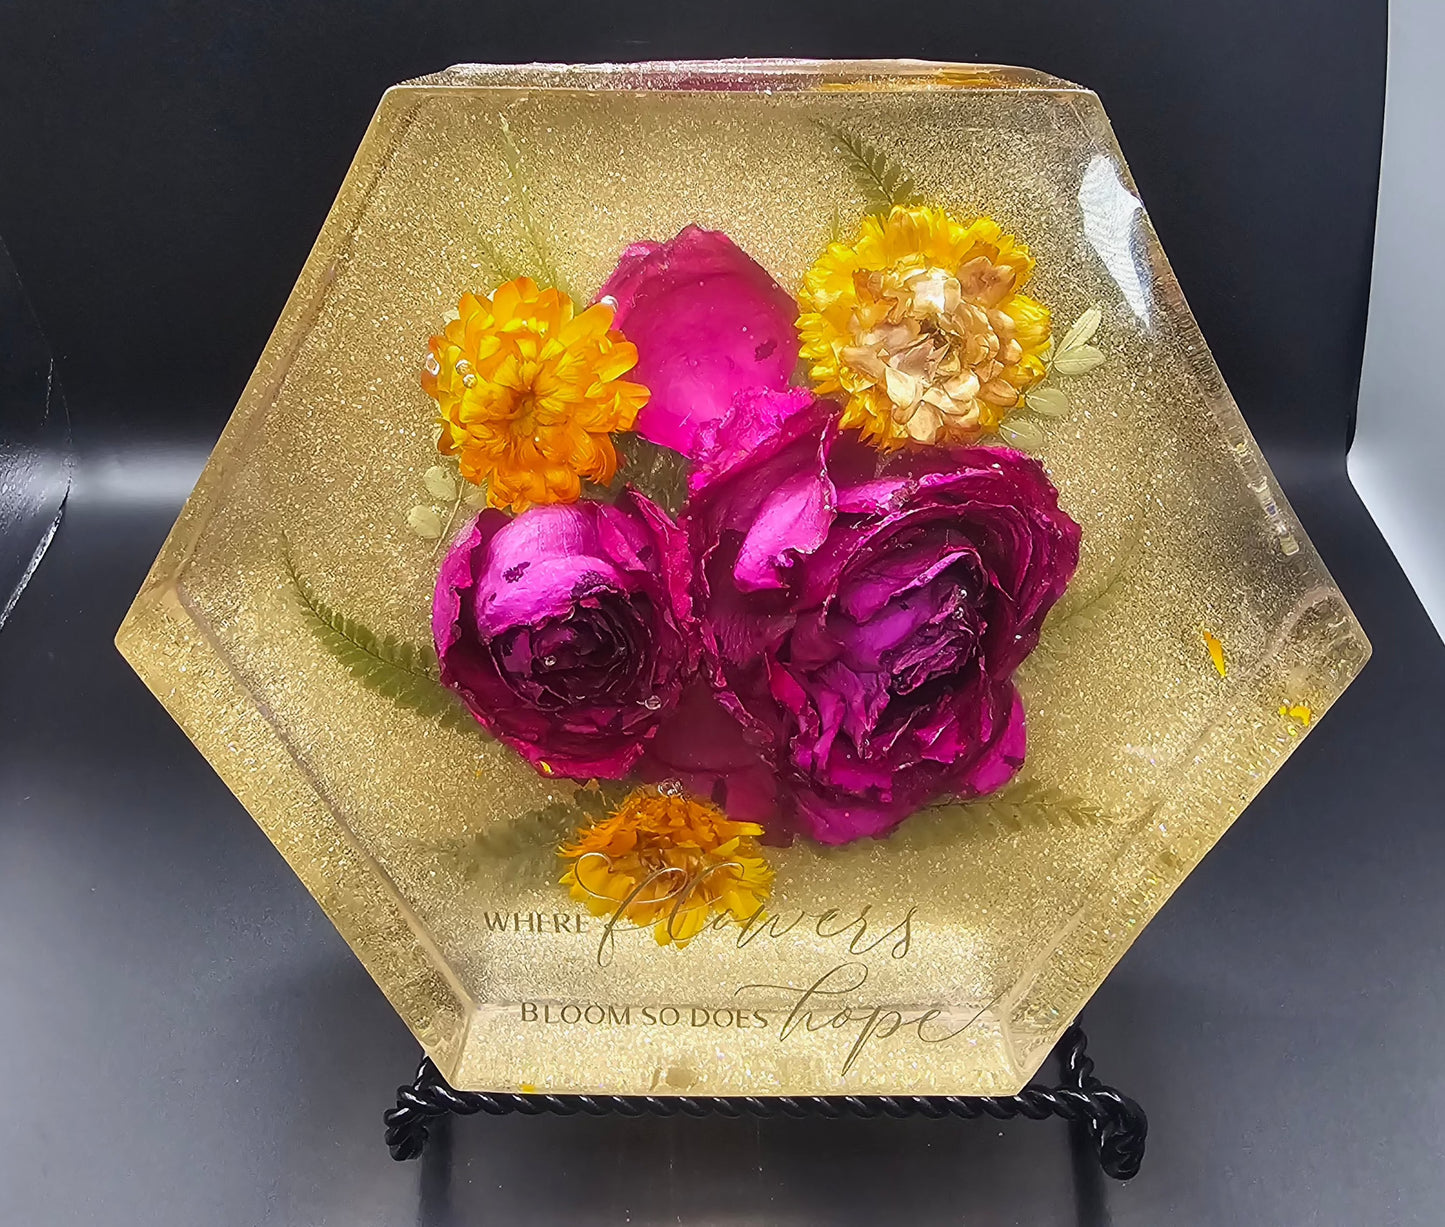 Vibrant preserved flowers arranged in a delicate display